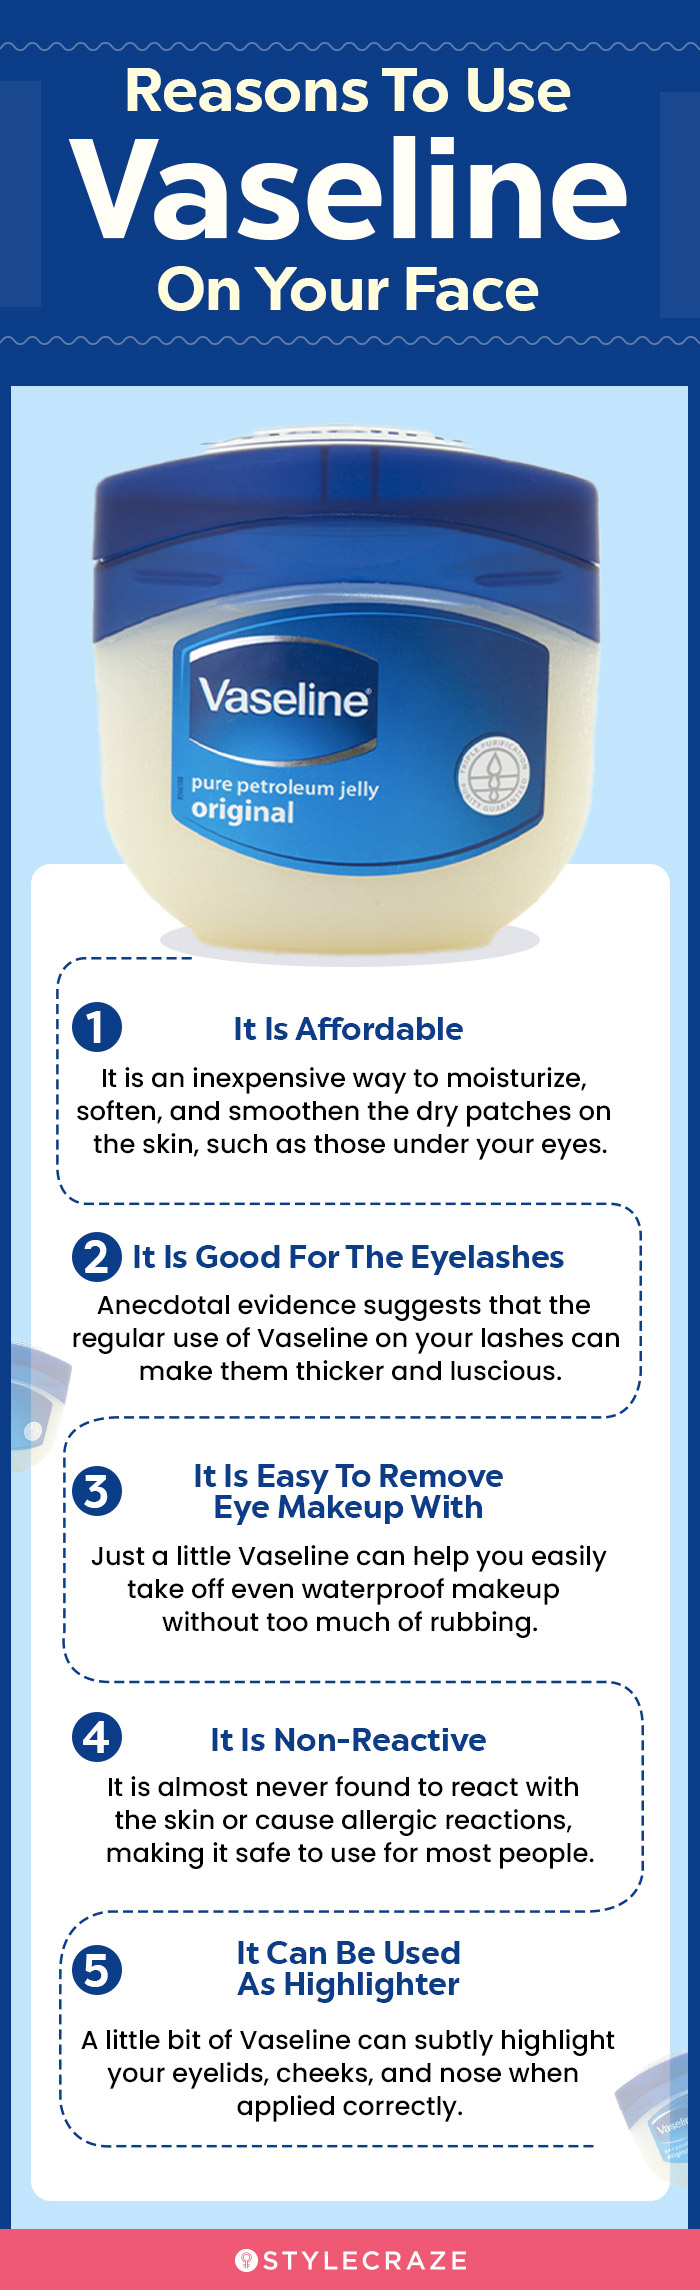 reasons to use vaseline on your face (infographic)